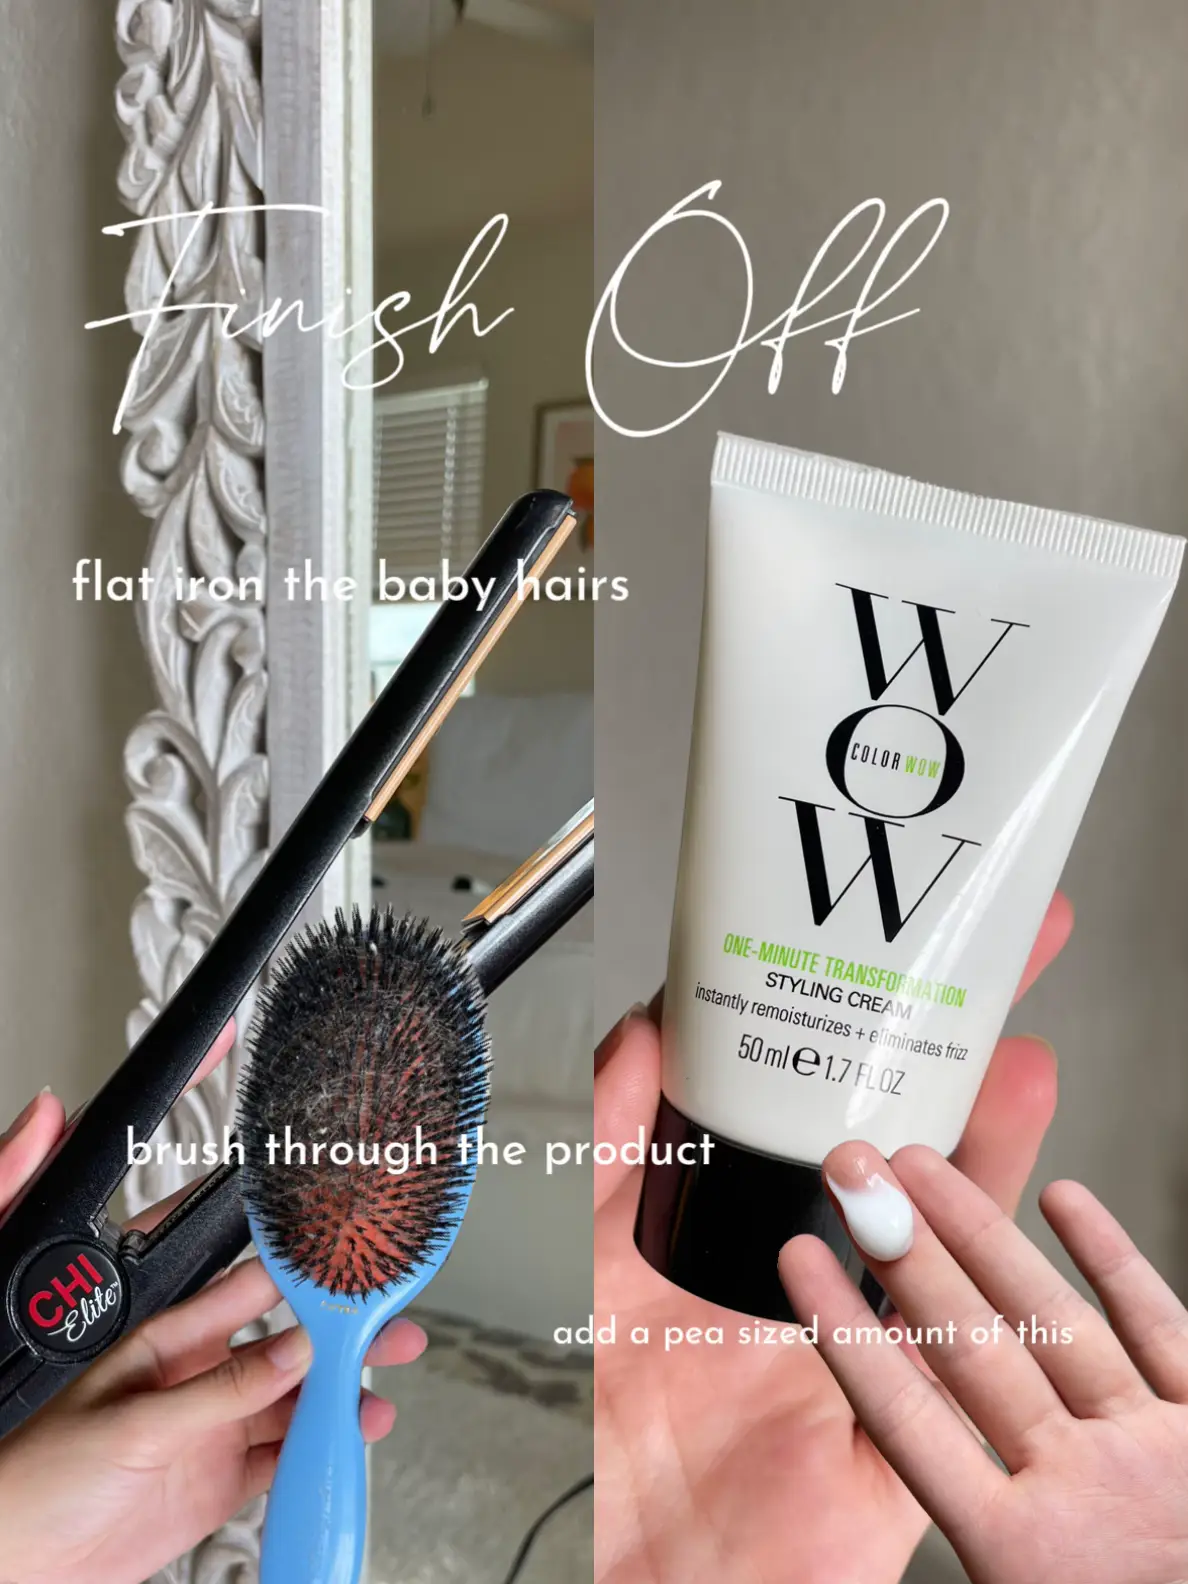 COLOR WOW Mini One Minute Transformation Anti Frizz Styling Cream